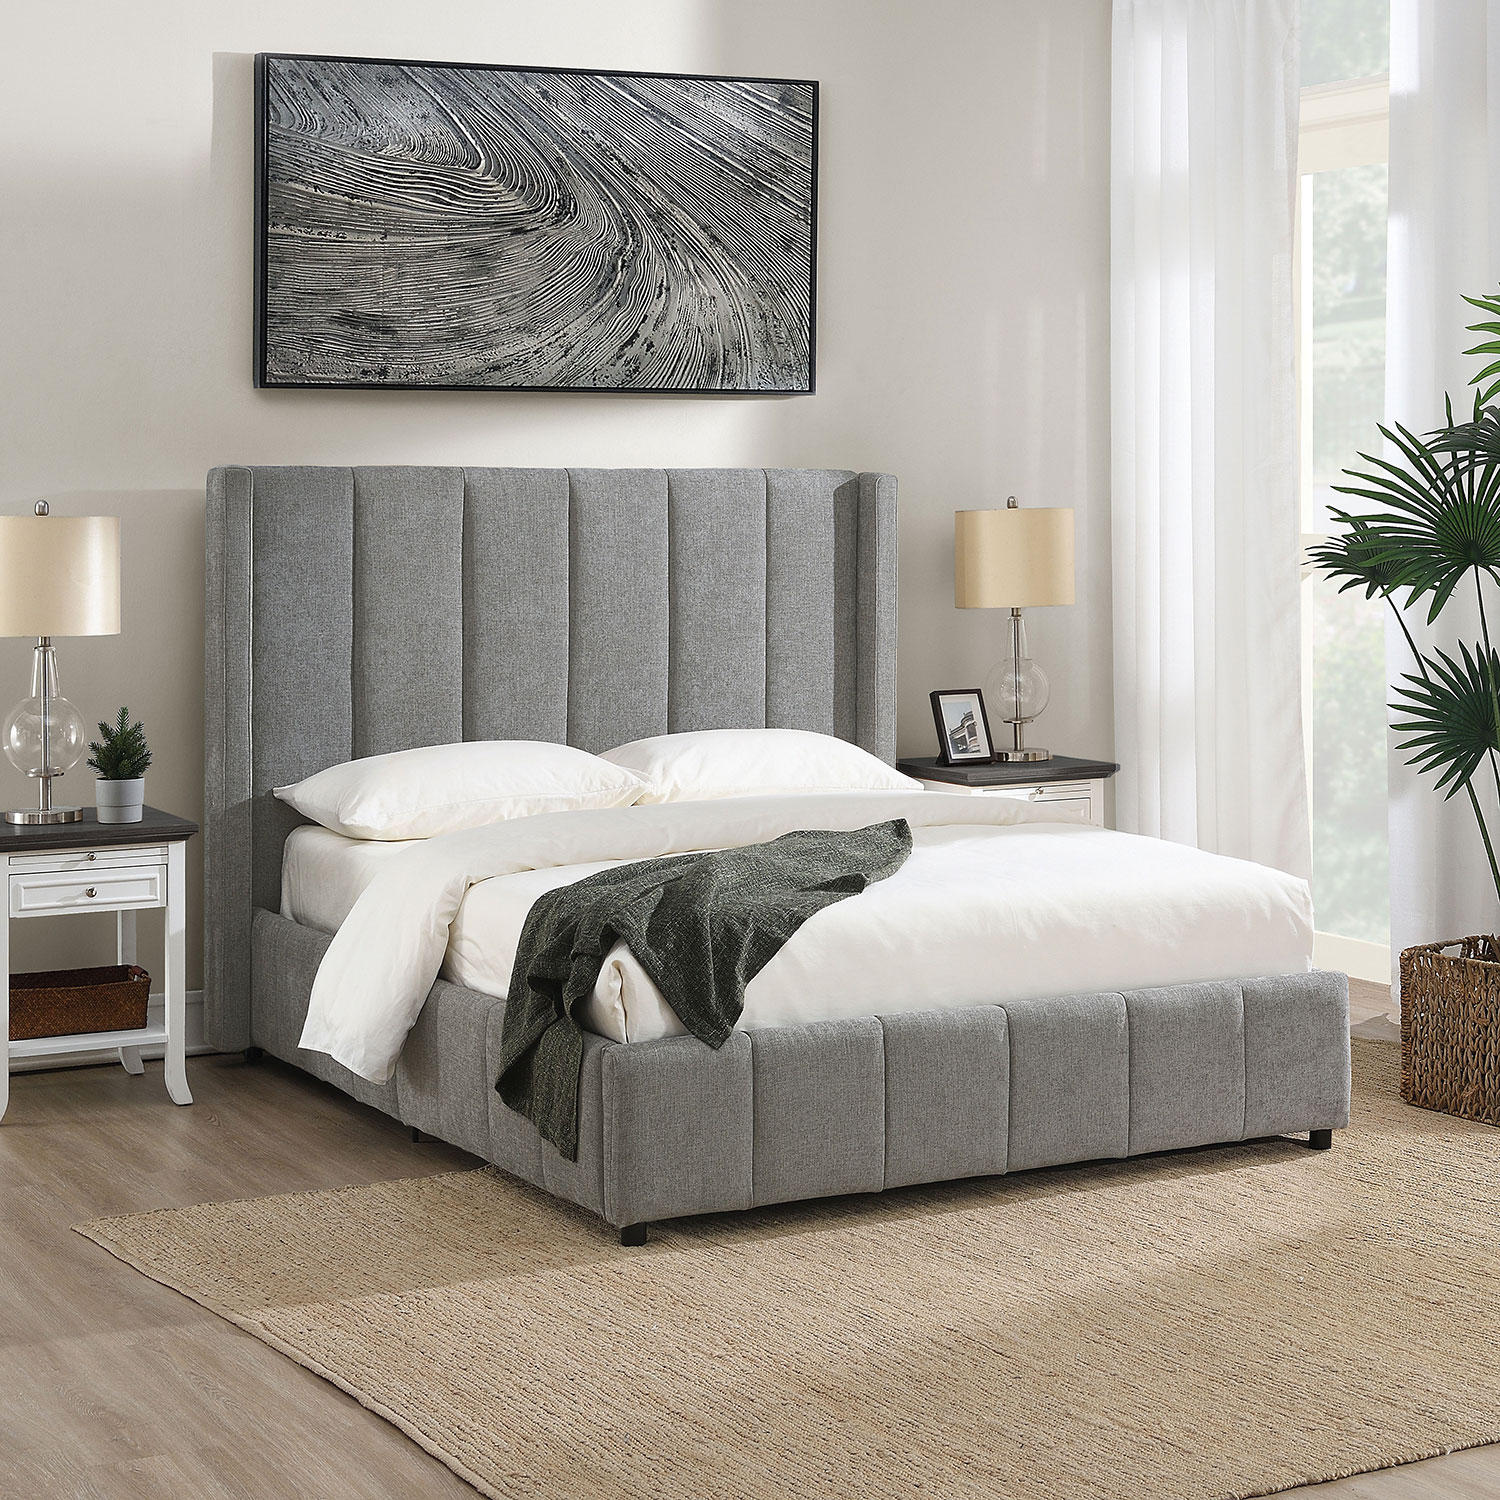 Sams Club Summer Home Sale: Up to $800 off on Top Brands